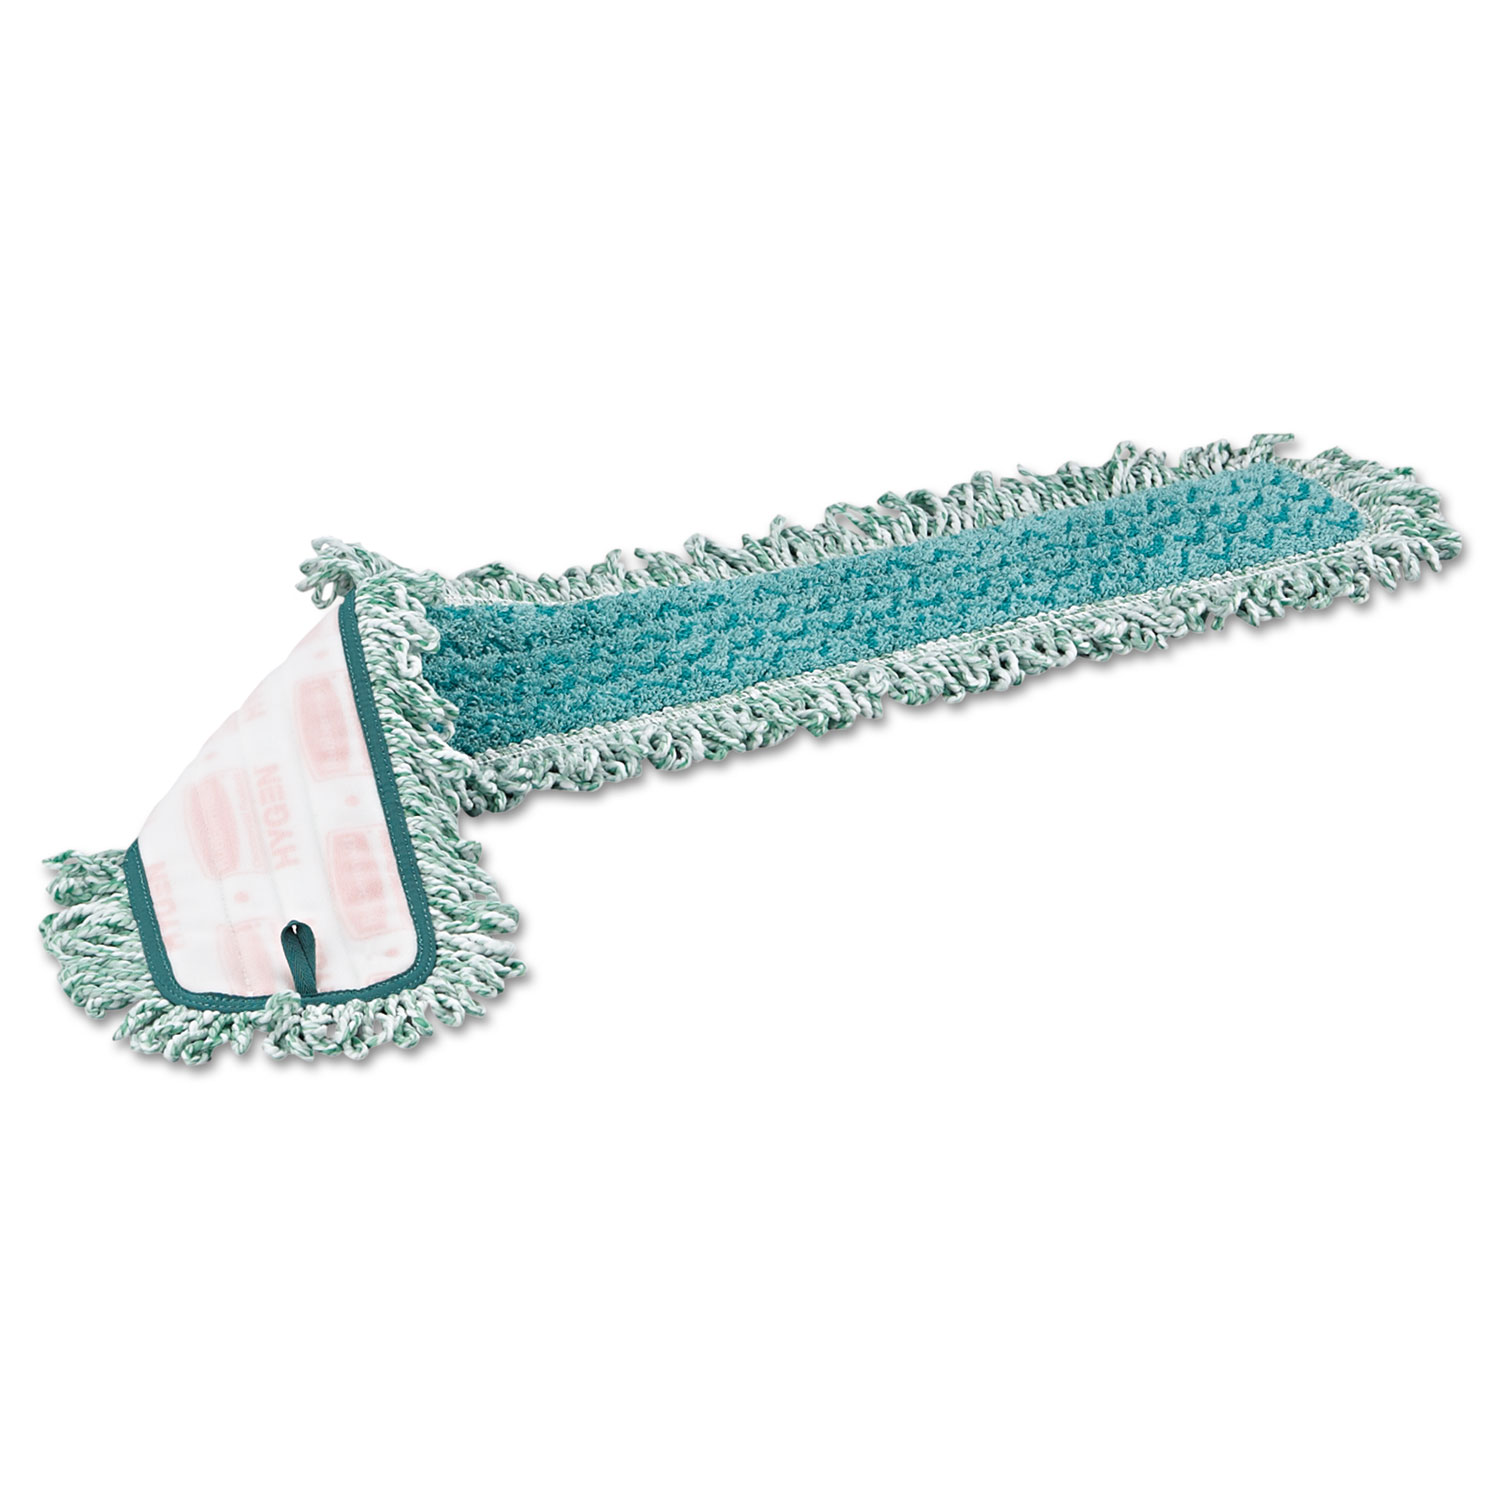 HYGEN Dry Dusting Mop Heads with Fringe, 36